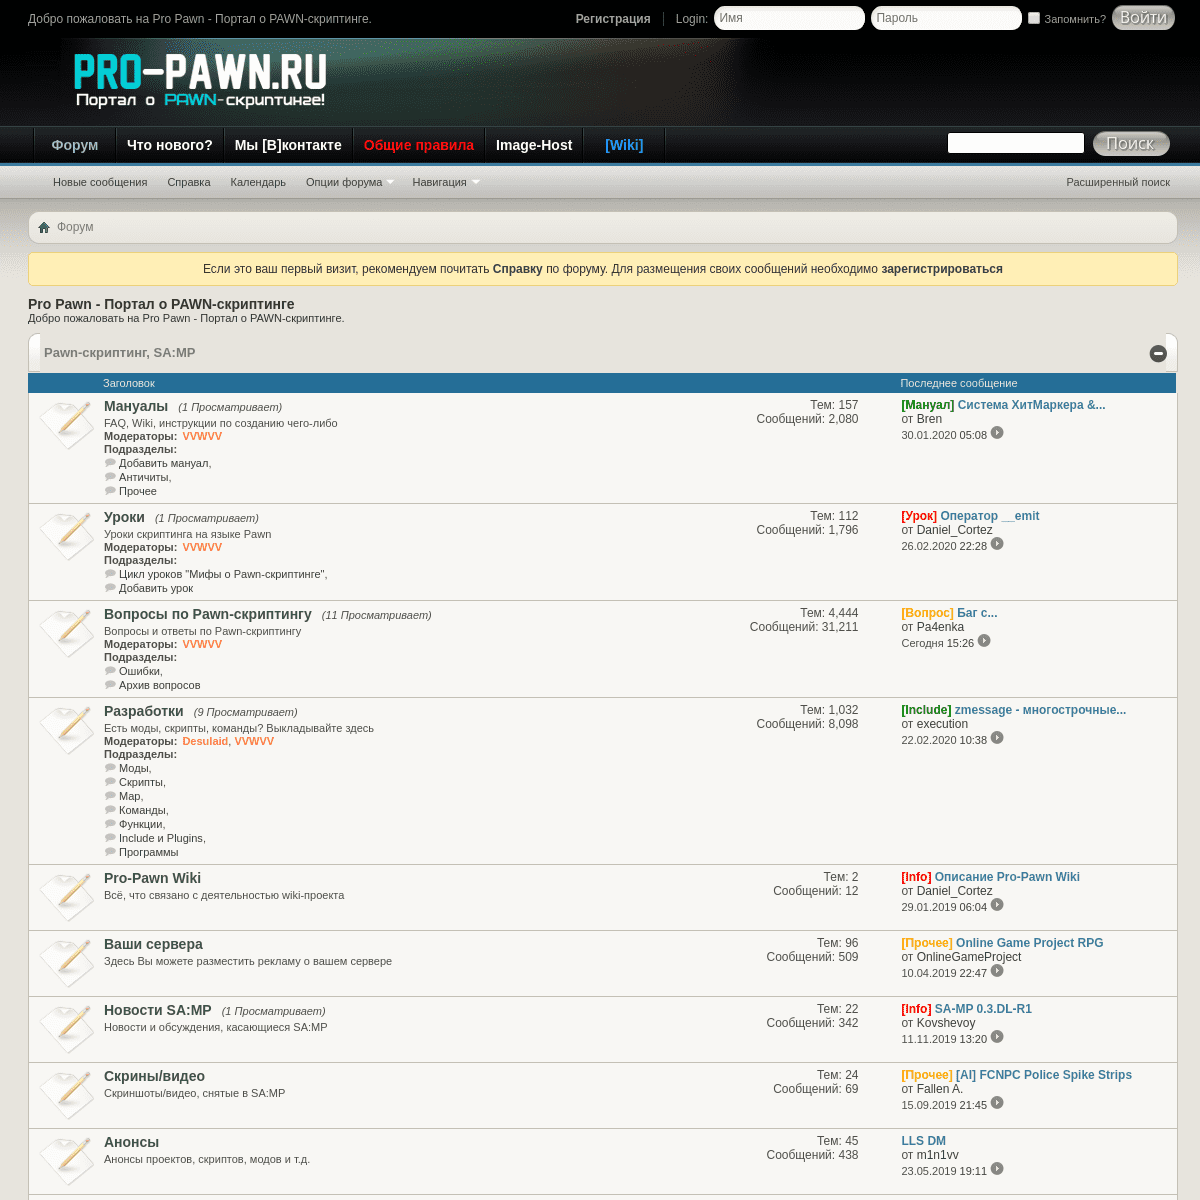 A complete backup of pro-pawn.ru